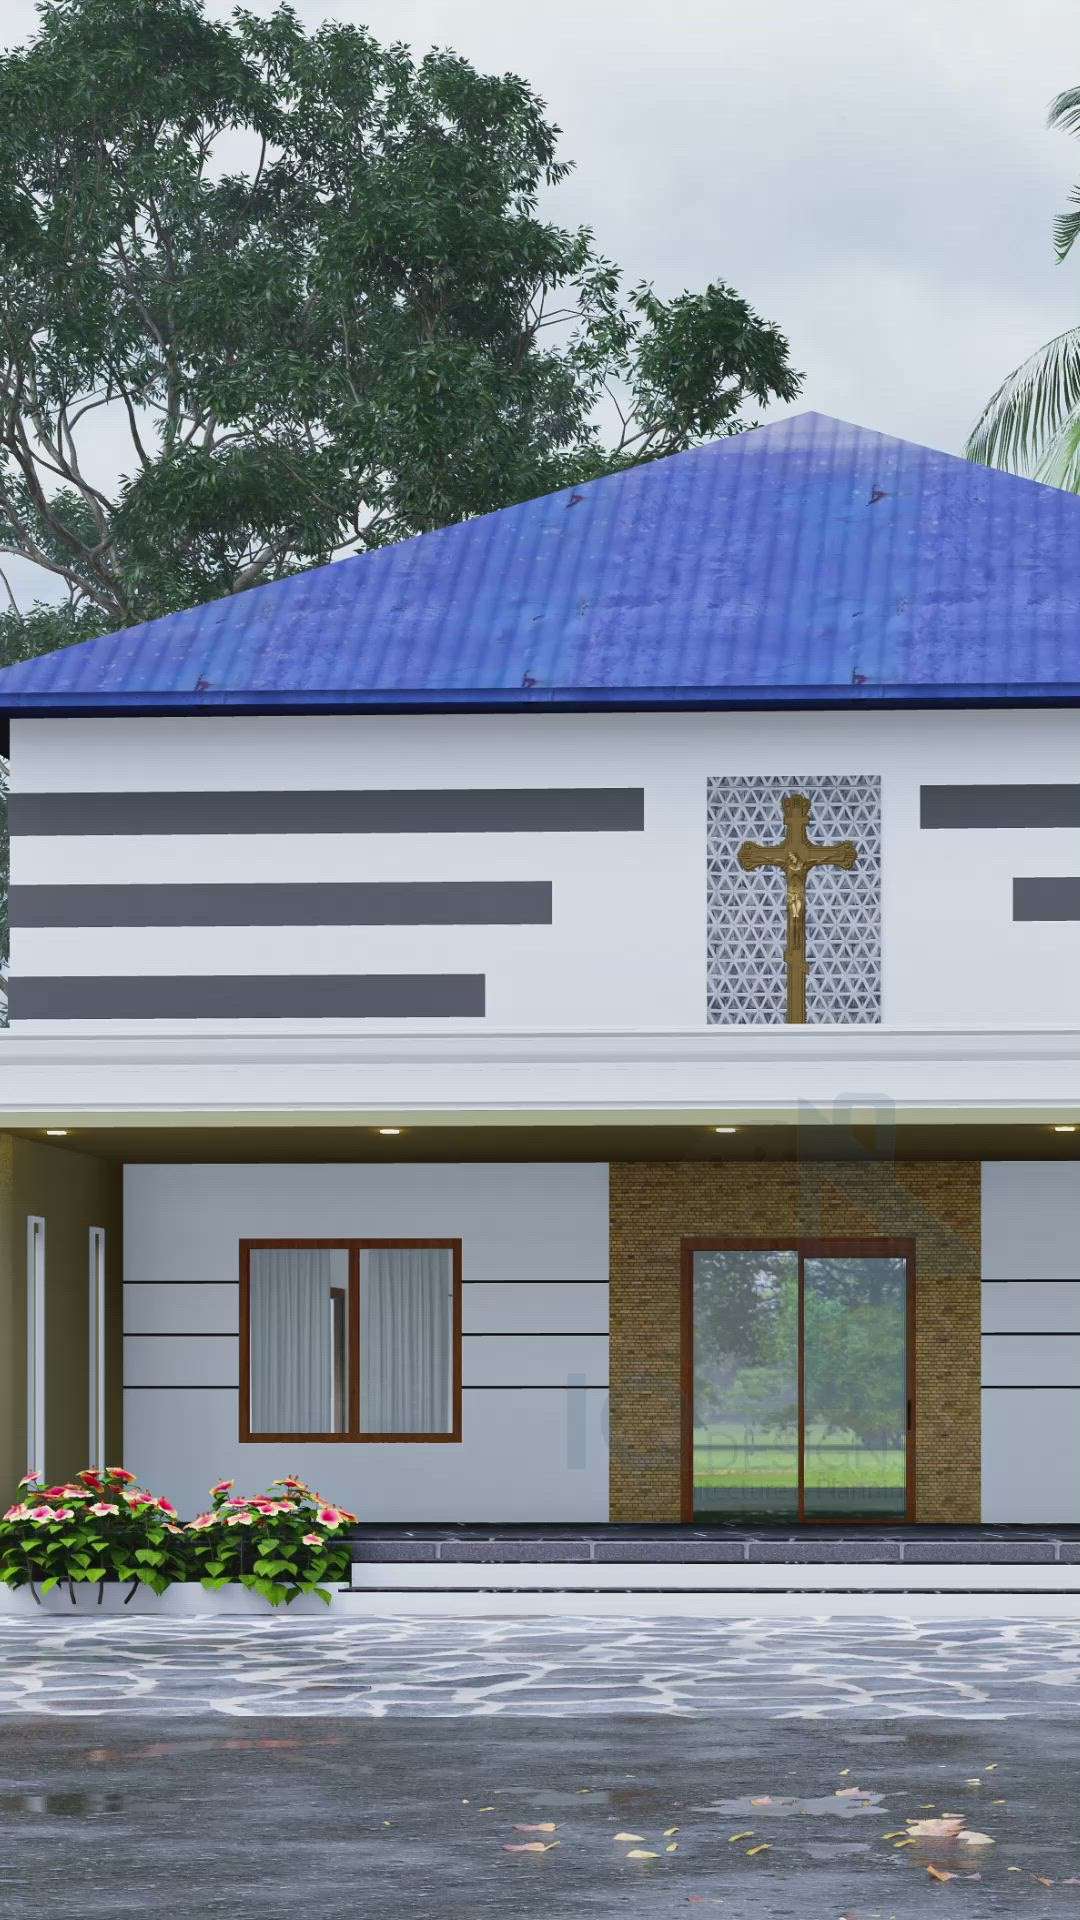 3D Designing Of A Church Hall ♥️😊
For More Enquiries,
Contact - 8848721023,9074476095

#construction #civilengineer #generalcontractor #constructionsite #constructionworker #constructionmanagement #constructionequipment #constructions #constructioncompany #constructionmaison #constructionmachinery #constructionwork #constructionzone #constructionjobs #constructionworkers #constructionindustry #constructionsafety #constructionmaterials #constructionpaper #constructionuk #constructioncake